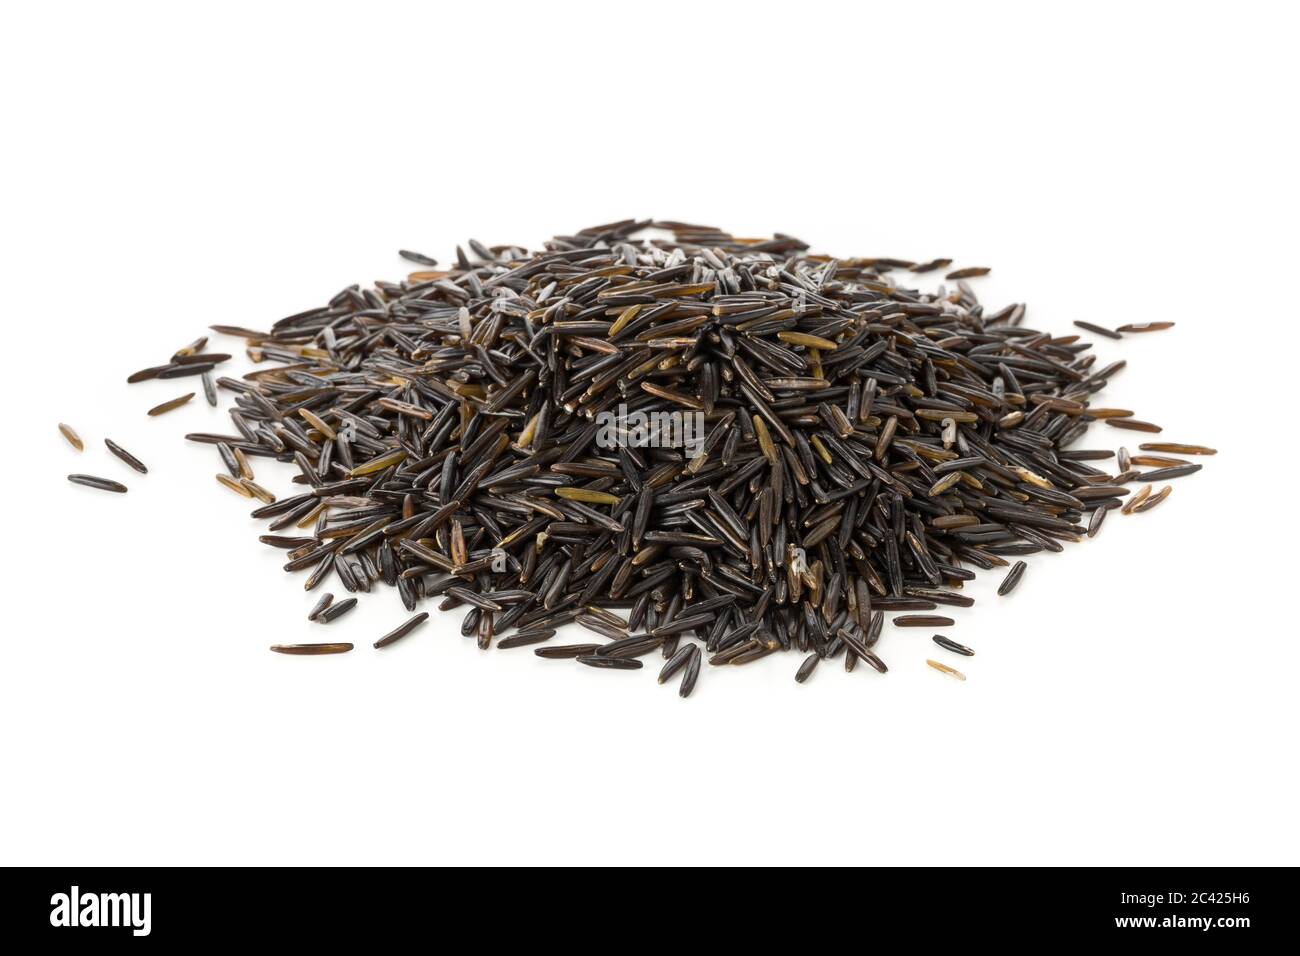 Heap of uncooked, raw, black wild rice grains over white background Stock Photo